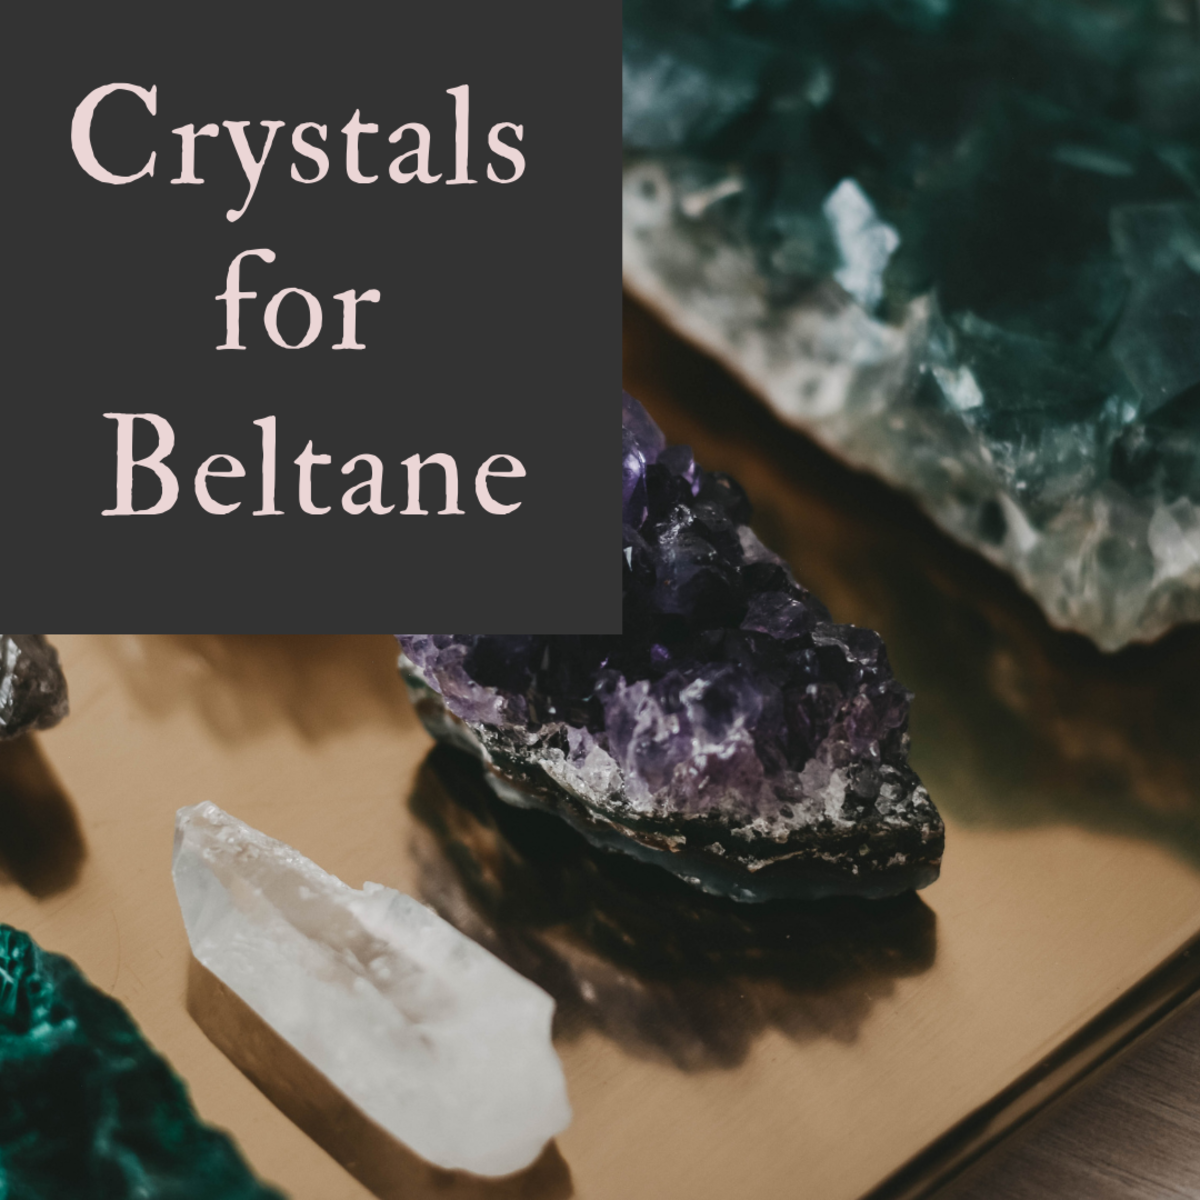 Discover what crystals to use at Beltane.